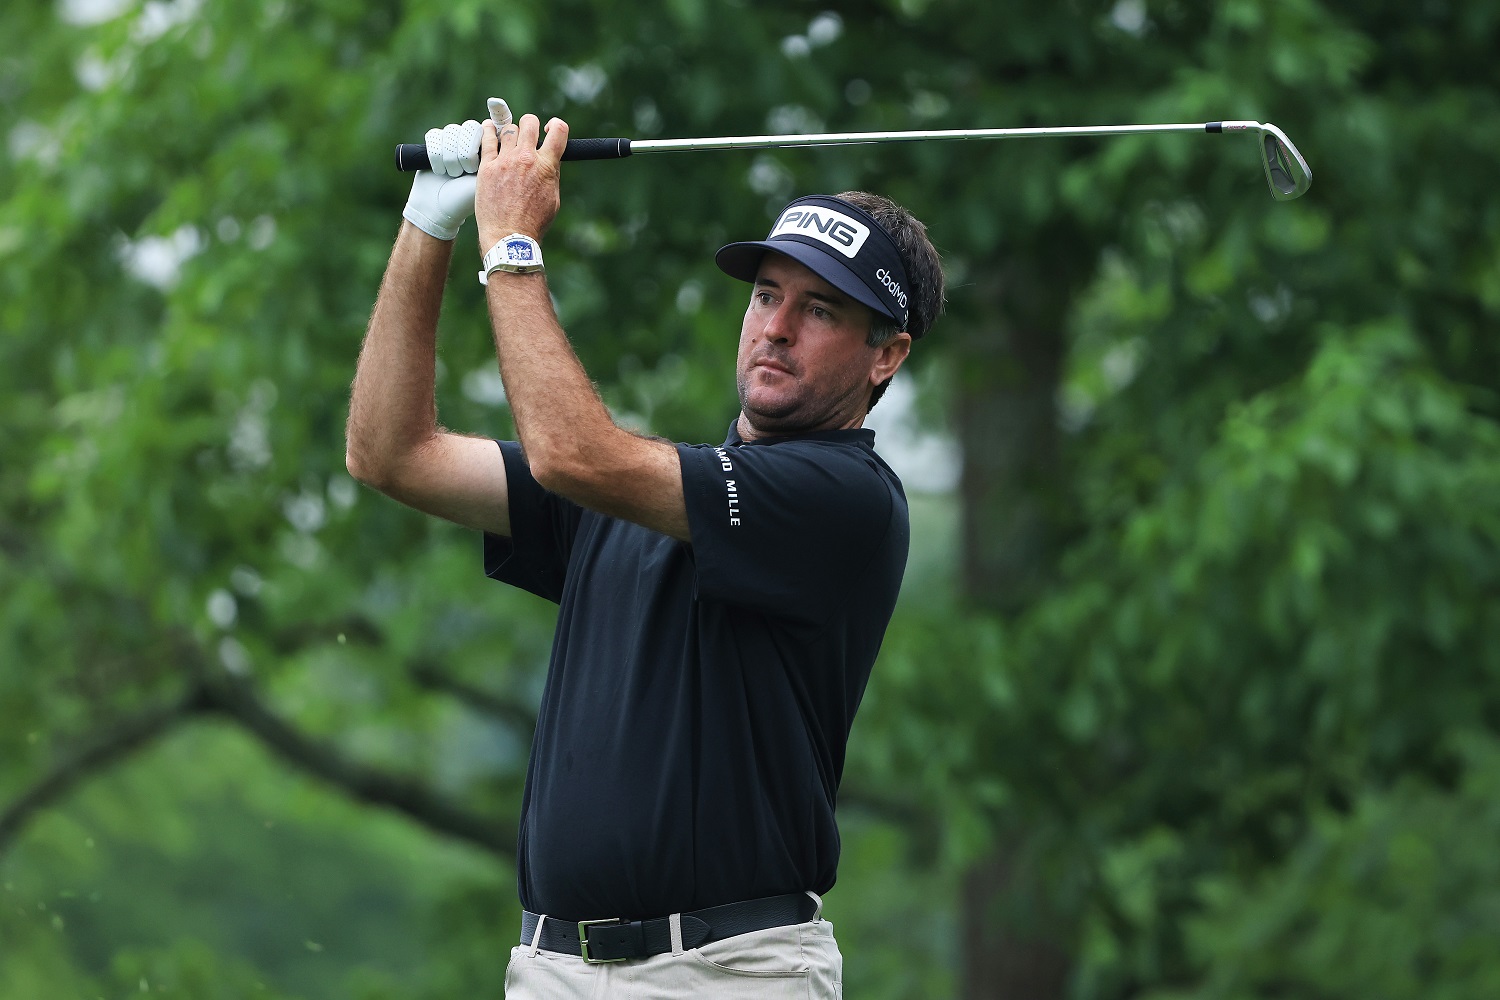 'I don't like enclosed places. I don't like elevators. I don't like heights. There's a lot of things that trigger my mental issues,' Bubba Watson said. |  Sam Greenwood/Getty Images